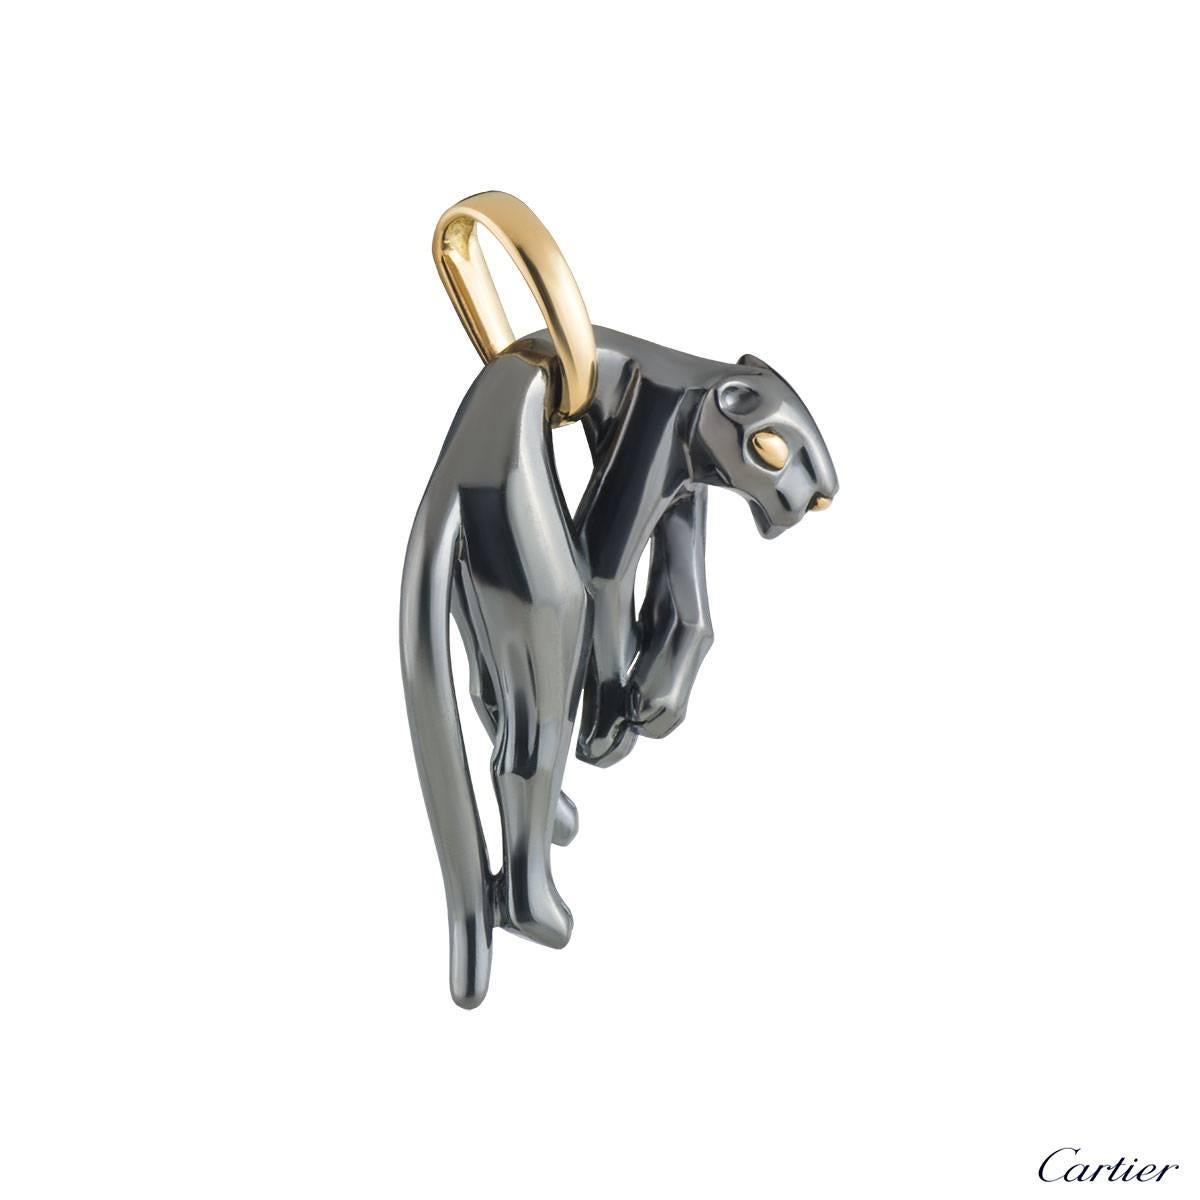 An exquisite 18k yellow gold and silverium Cartier pendant from the Panthere collection. The pendant comprises of a panther motif hanging from the waist with a loop bail to allow for different chains to be worn. The motif measures 4.5cm in height